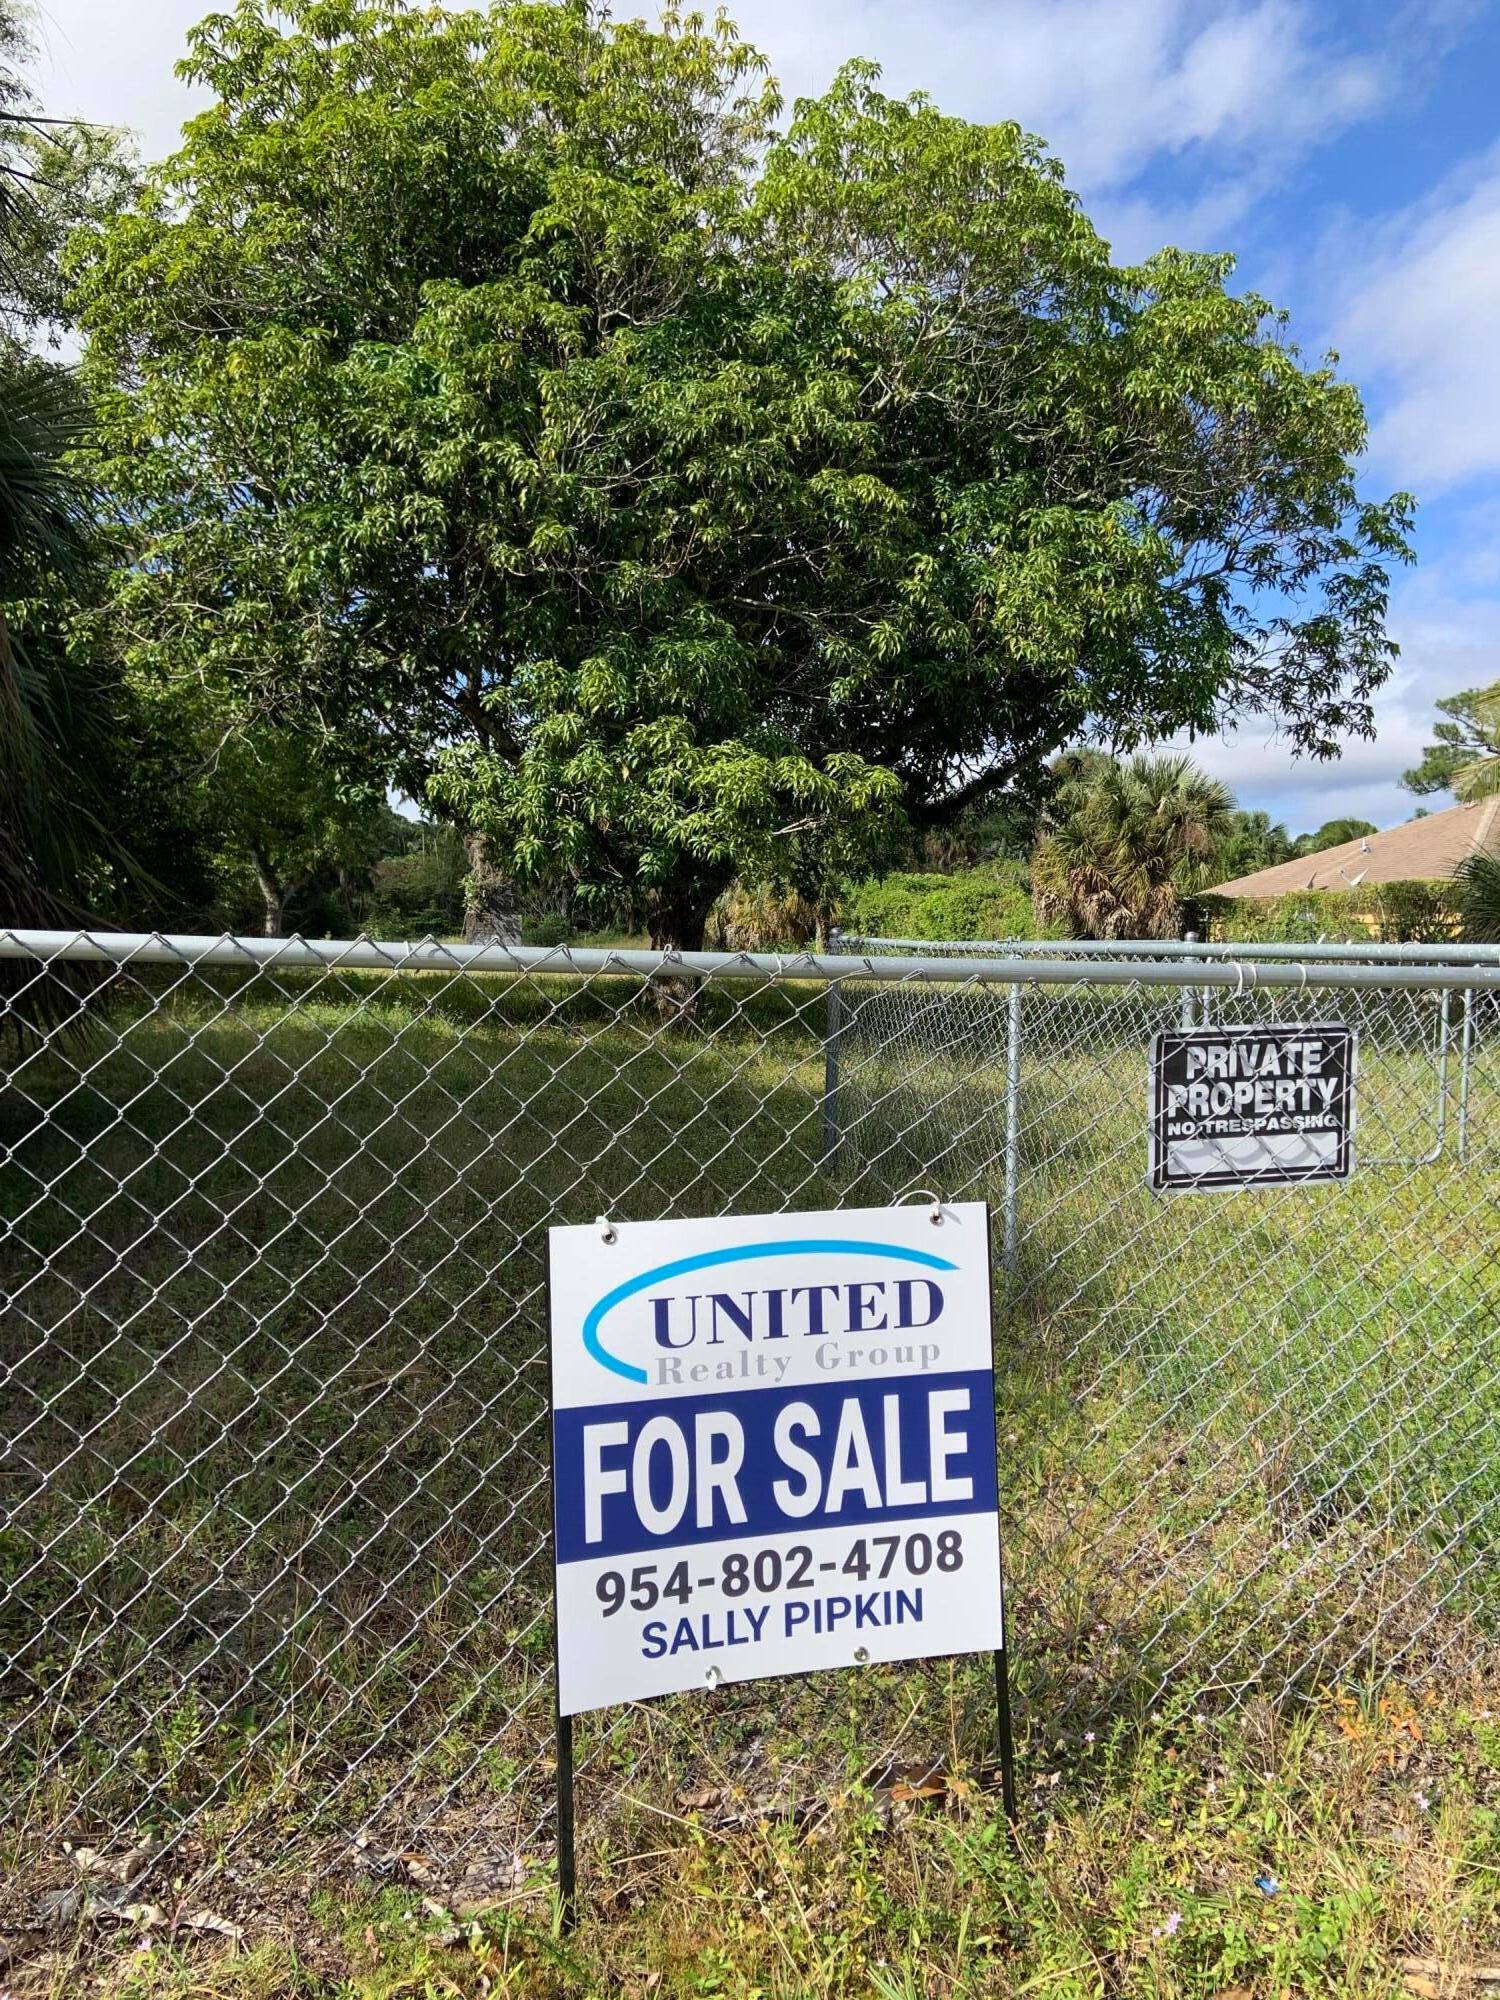 This. 32 acre land lot near PBIA, offers a prime location for building a beautiful residential home.